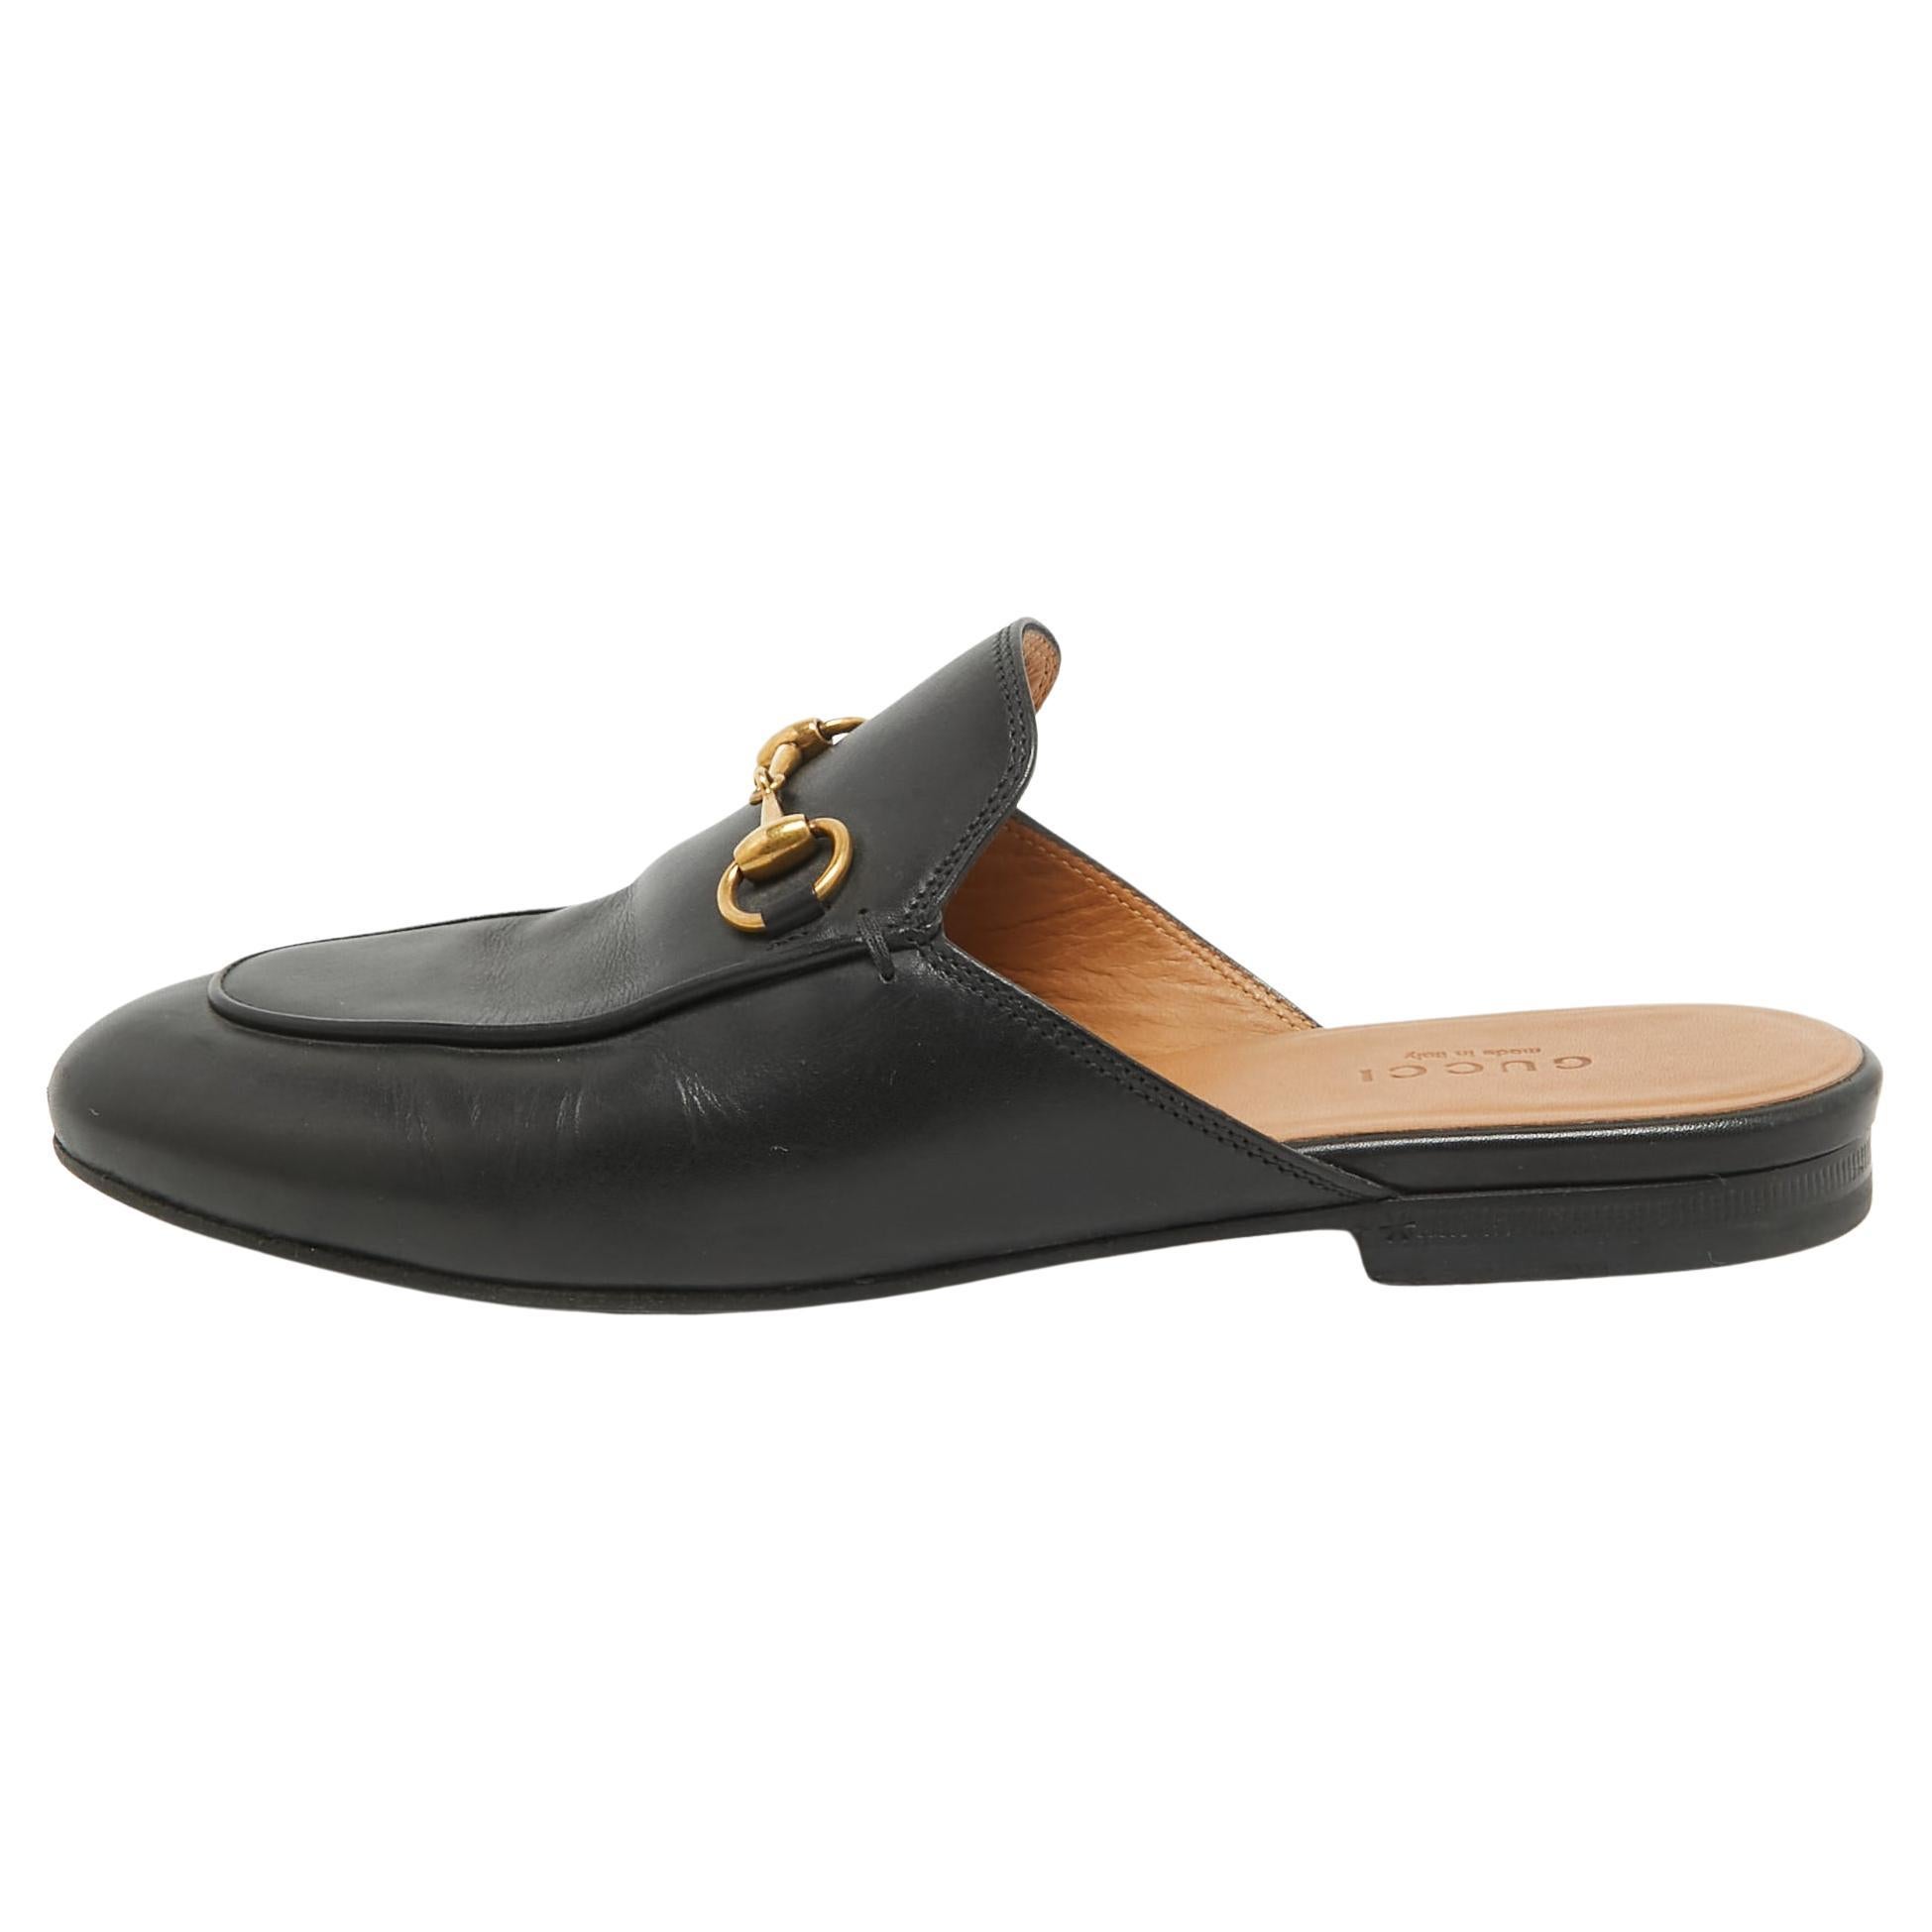 Gucci Black Leather Princetown Flat Mules Size 36.5 For Sale